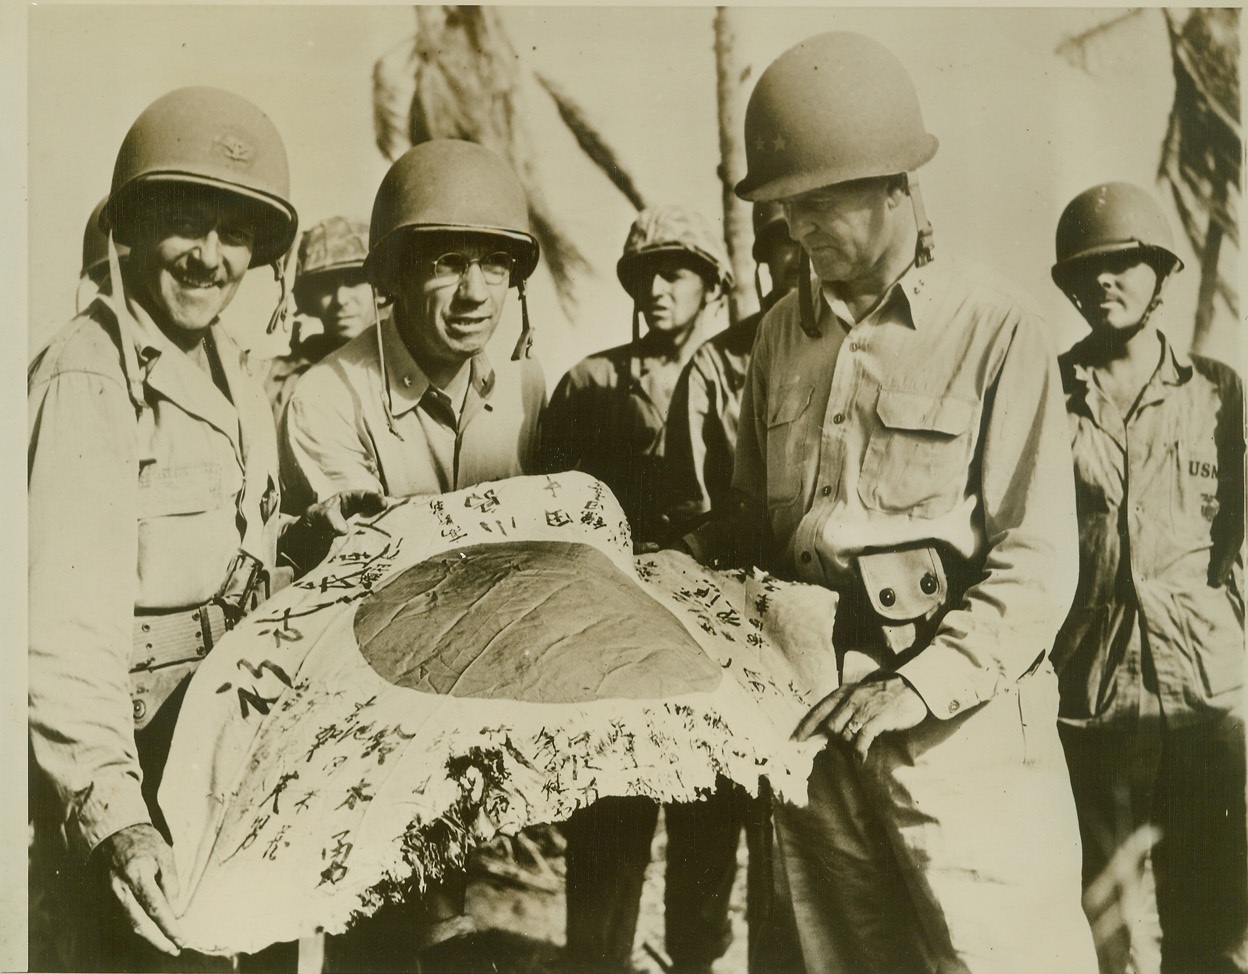 Led Forces at Eniwetok, 2/28/1944. Eniwetok—Here are the men that led the forces capturing Eniwetok Atoll, latest conquest of U.S. attackers in the Marshall Islands. Shown with the Jap flag captured in the fighting, are: (left to right), Col. Russell G. Ayers, Brig. Gen. Thomas E. Watson, and Rear Admiral H.W. Hill. They commanded Army, Navy, and Marine Corps elements in the fighting.  Credit: U.S. Coast Guard photo from ACME.;